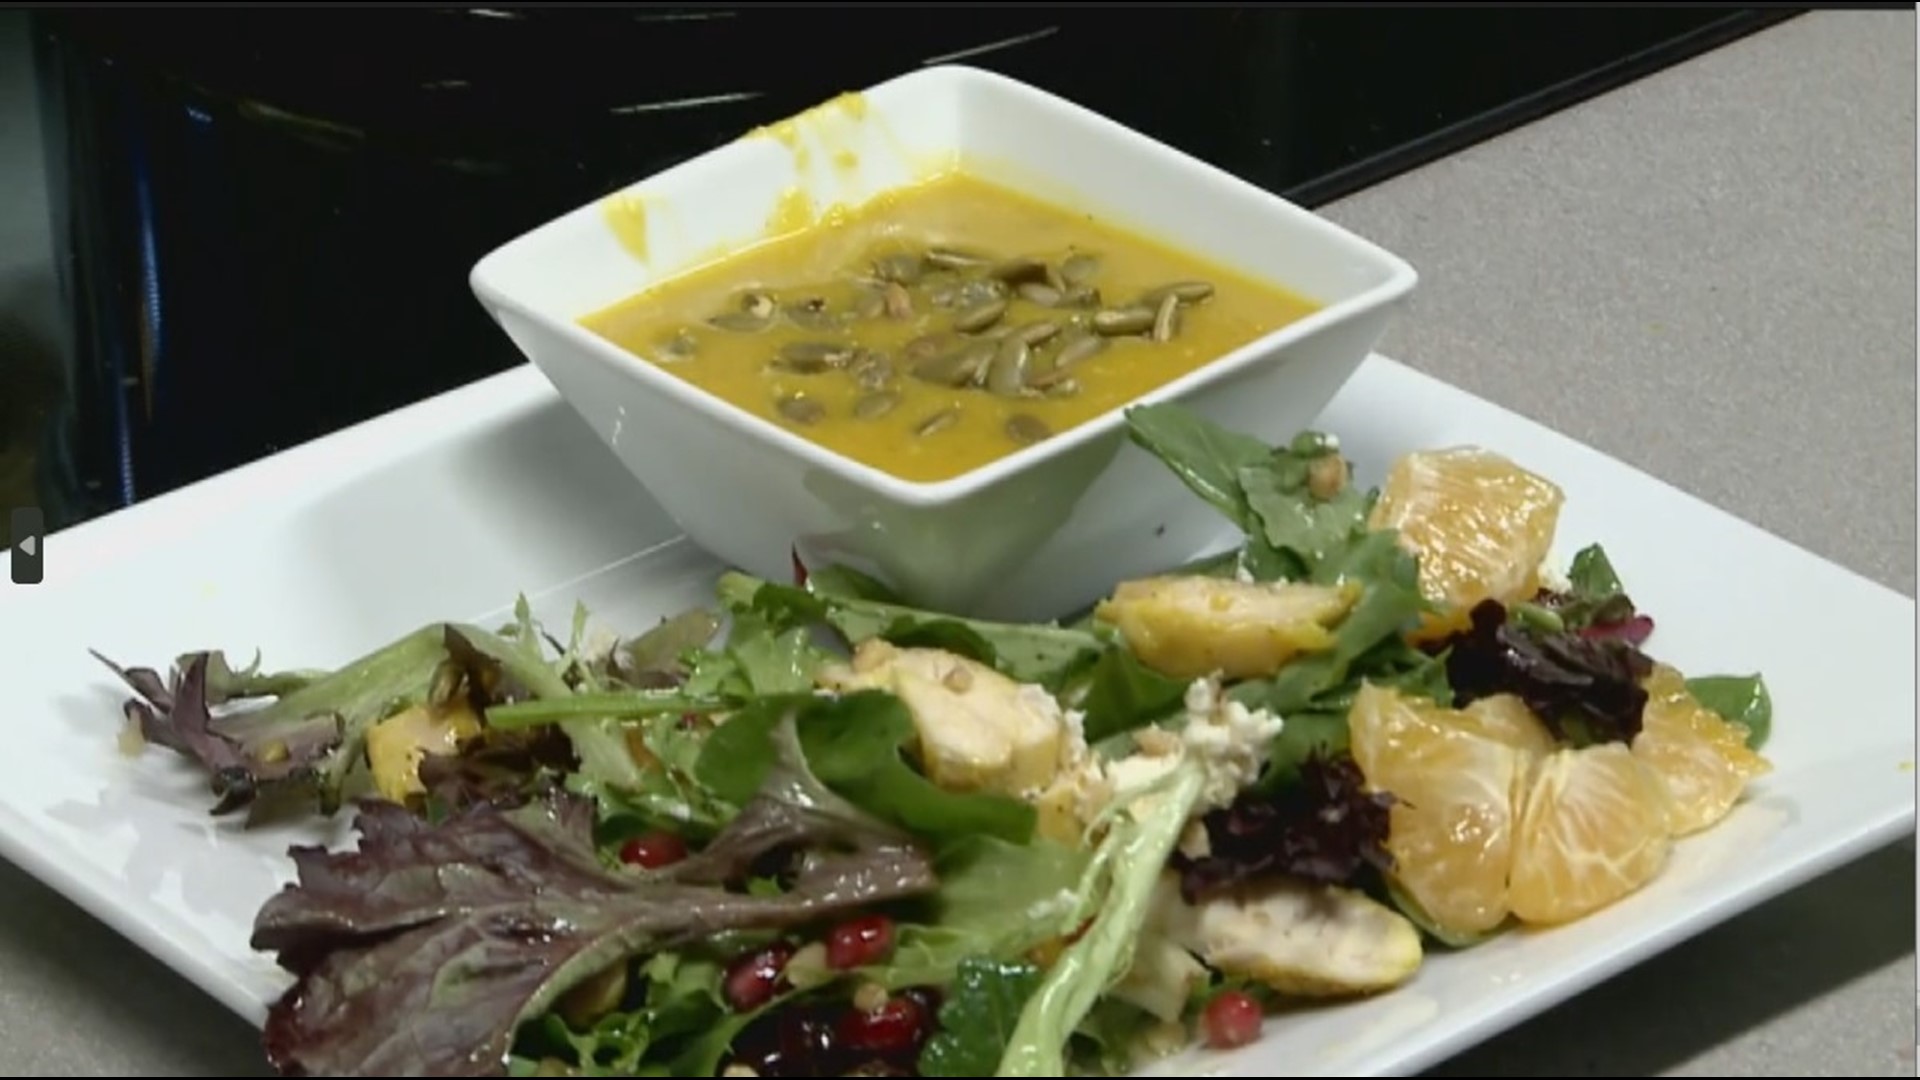 It's a last hurrah for many winter items, and Andrea Michaels combines them into a soup and salad combo that's sure to please—with an unexpected secret ingredient!